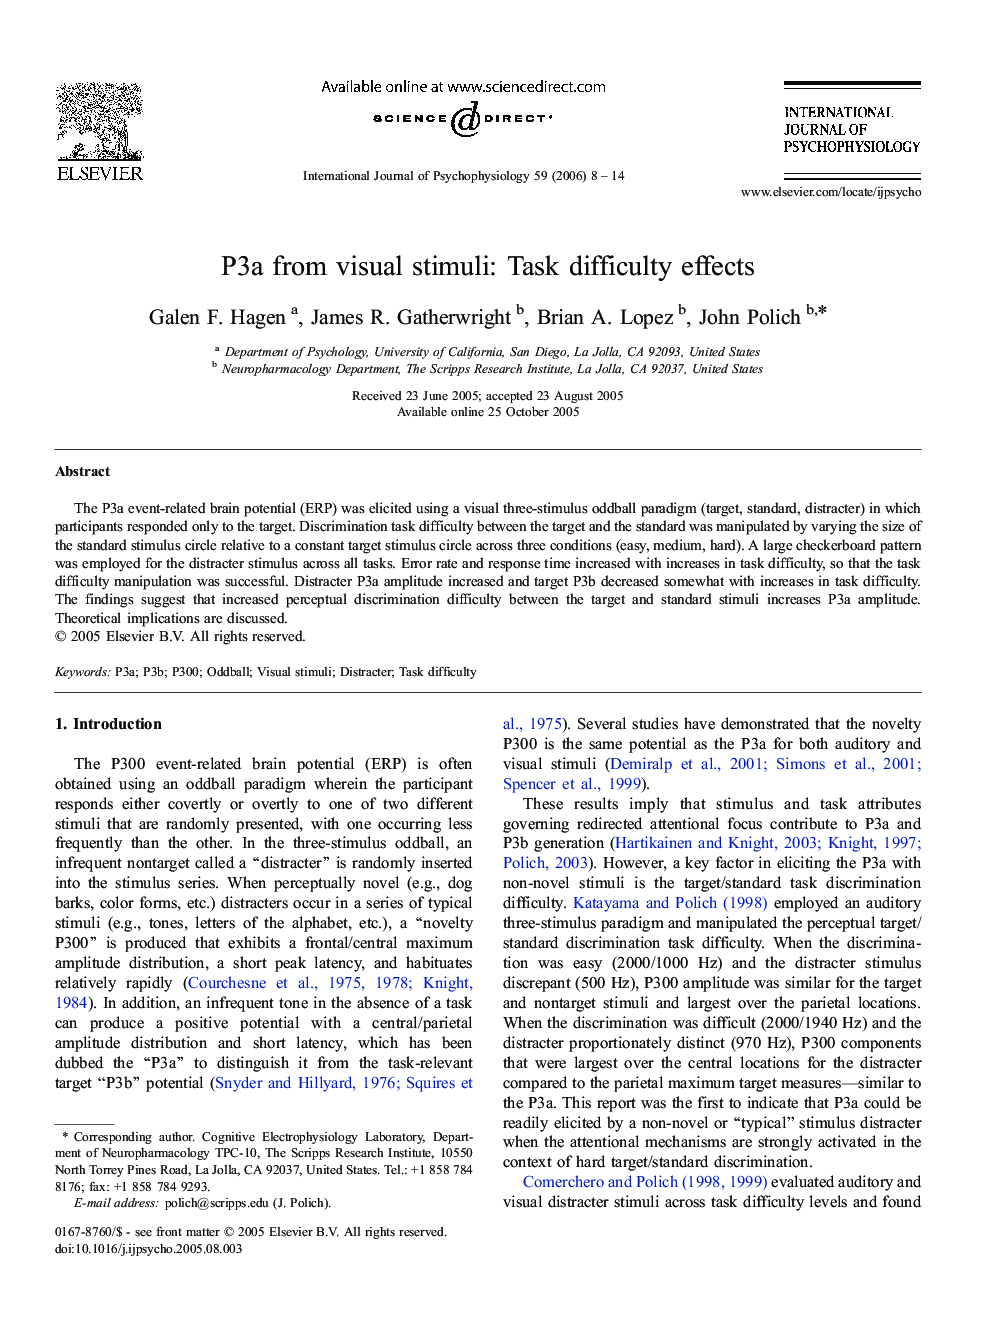 P3a from visual stimuli: Task difficulty effects